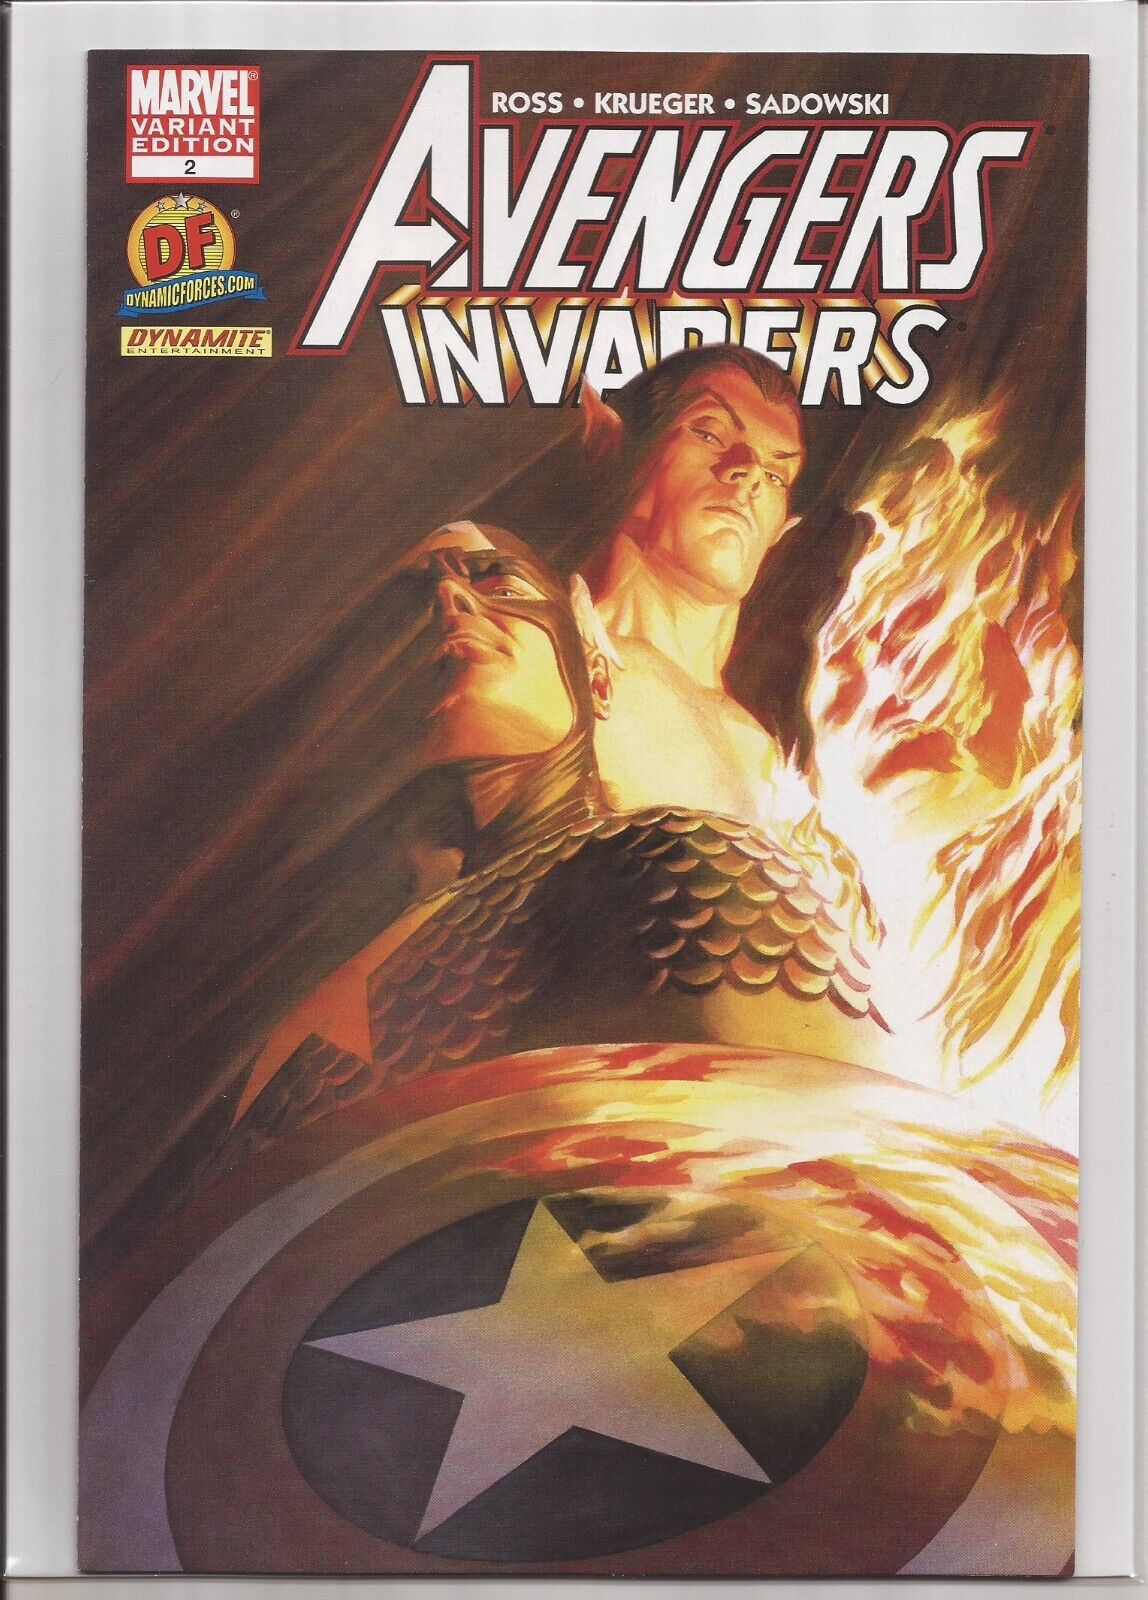 AVENGERS/INVADERS #2 - DYNAMIC FORCES ALEX ROSS VARIANT WITH DF COA